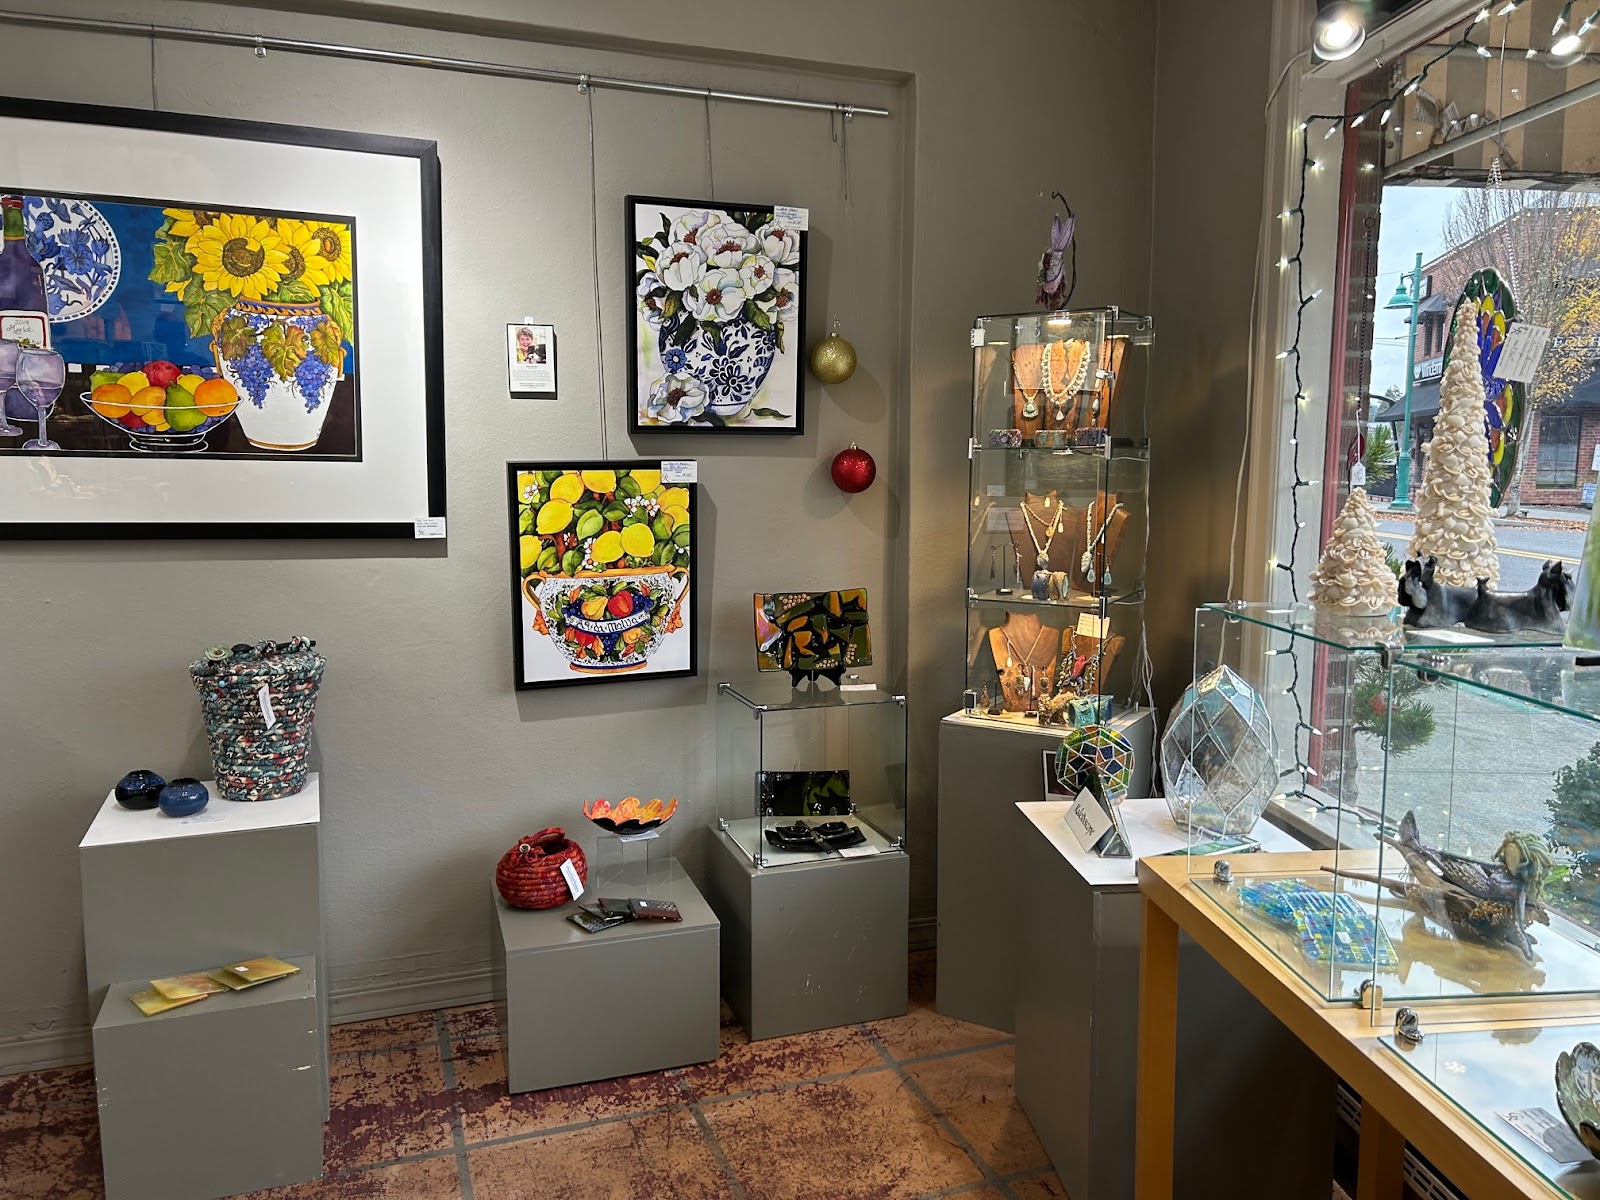 Gallery Row features painters, ceramicists, fiber artists, jewelers and so much more!